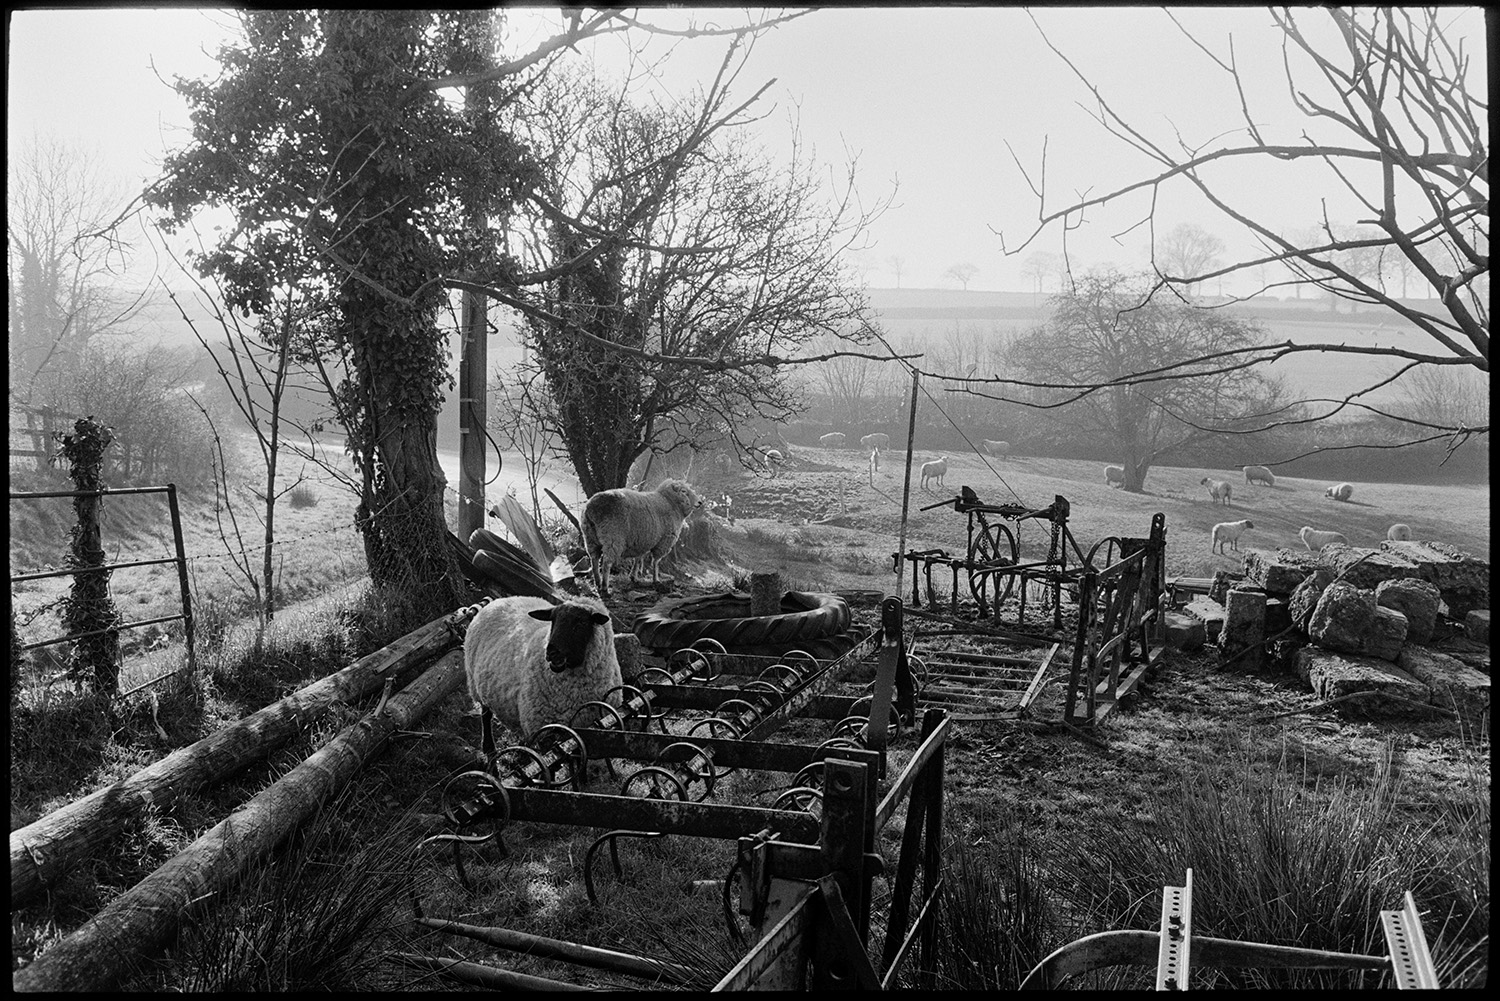 Farmyard, woman letting out poultry from houses, farm implements, morning light. 
[Sheep in a field with old farm machinery, including a harrow, an old tyre and a tree, at Lower Langham, Dolton.]